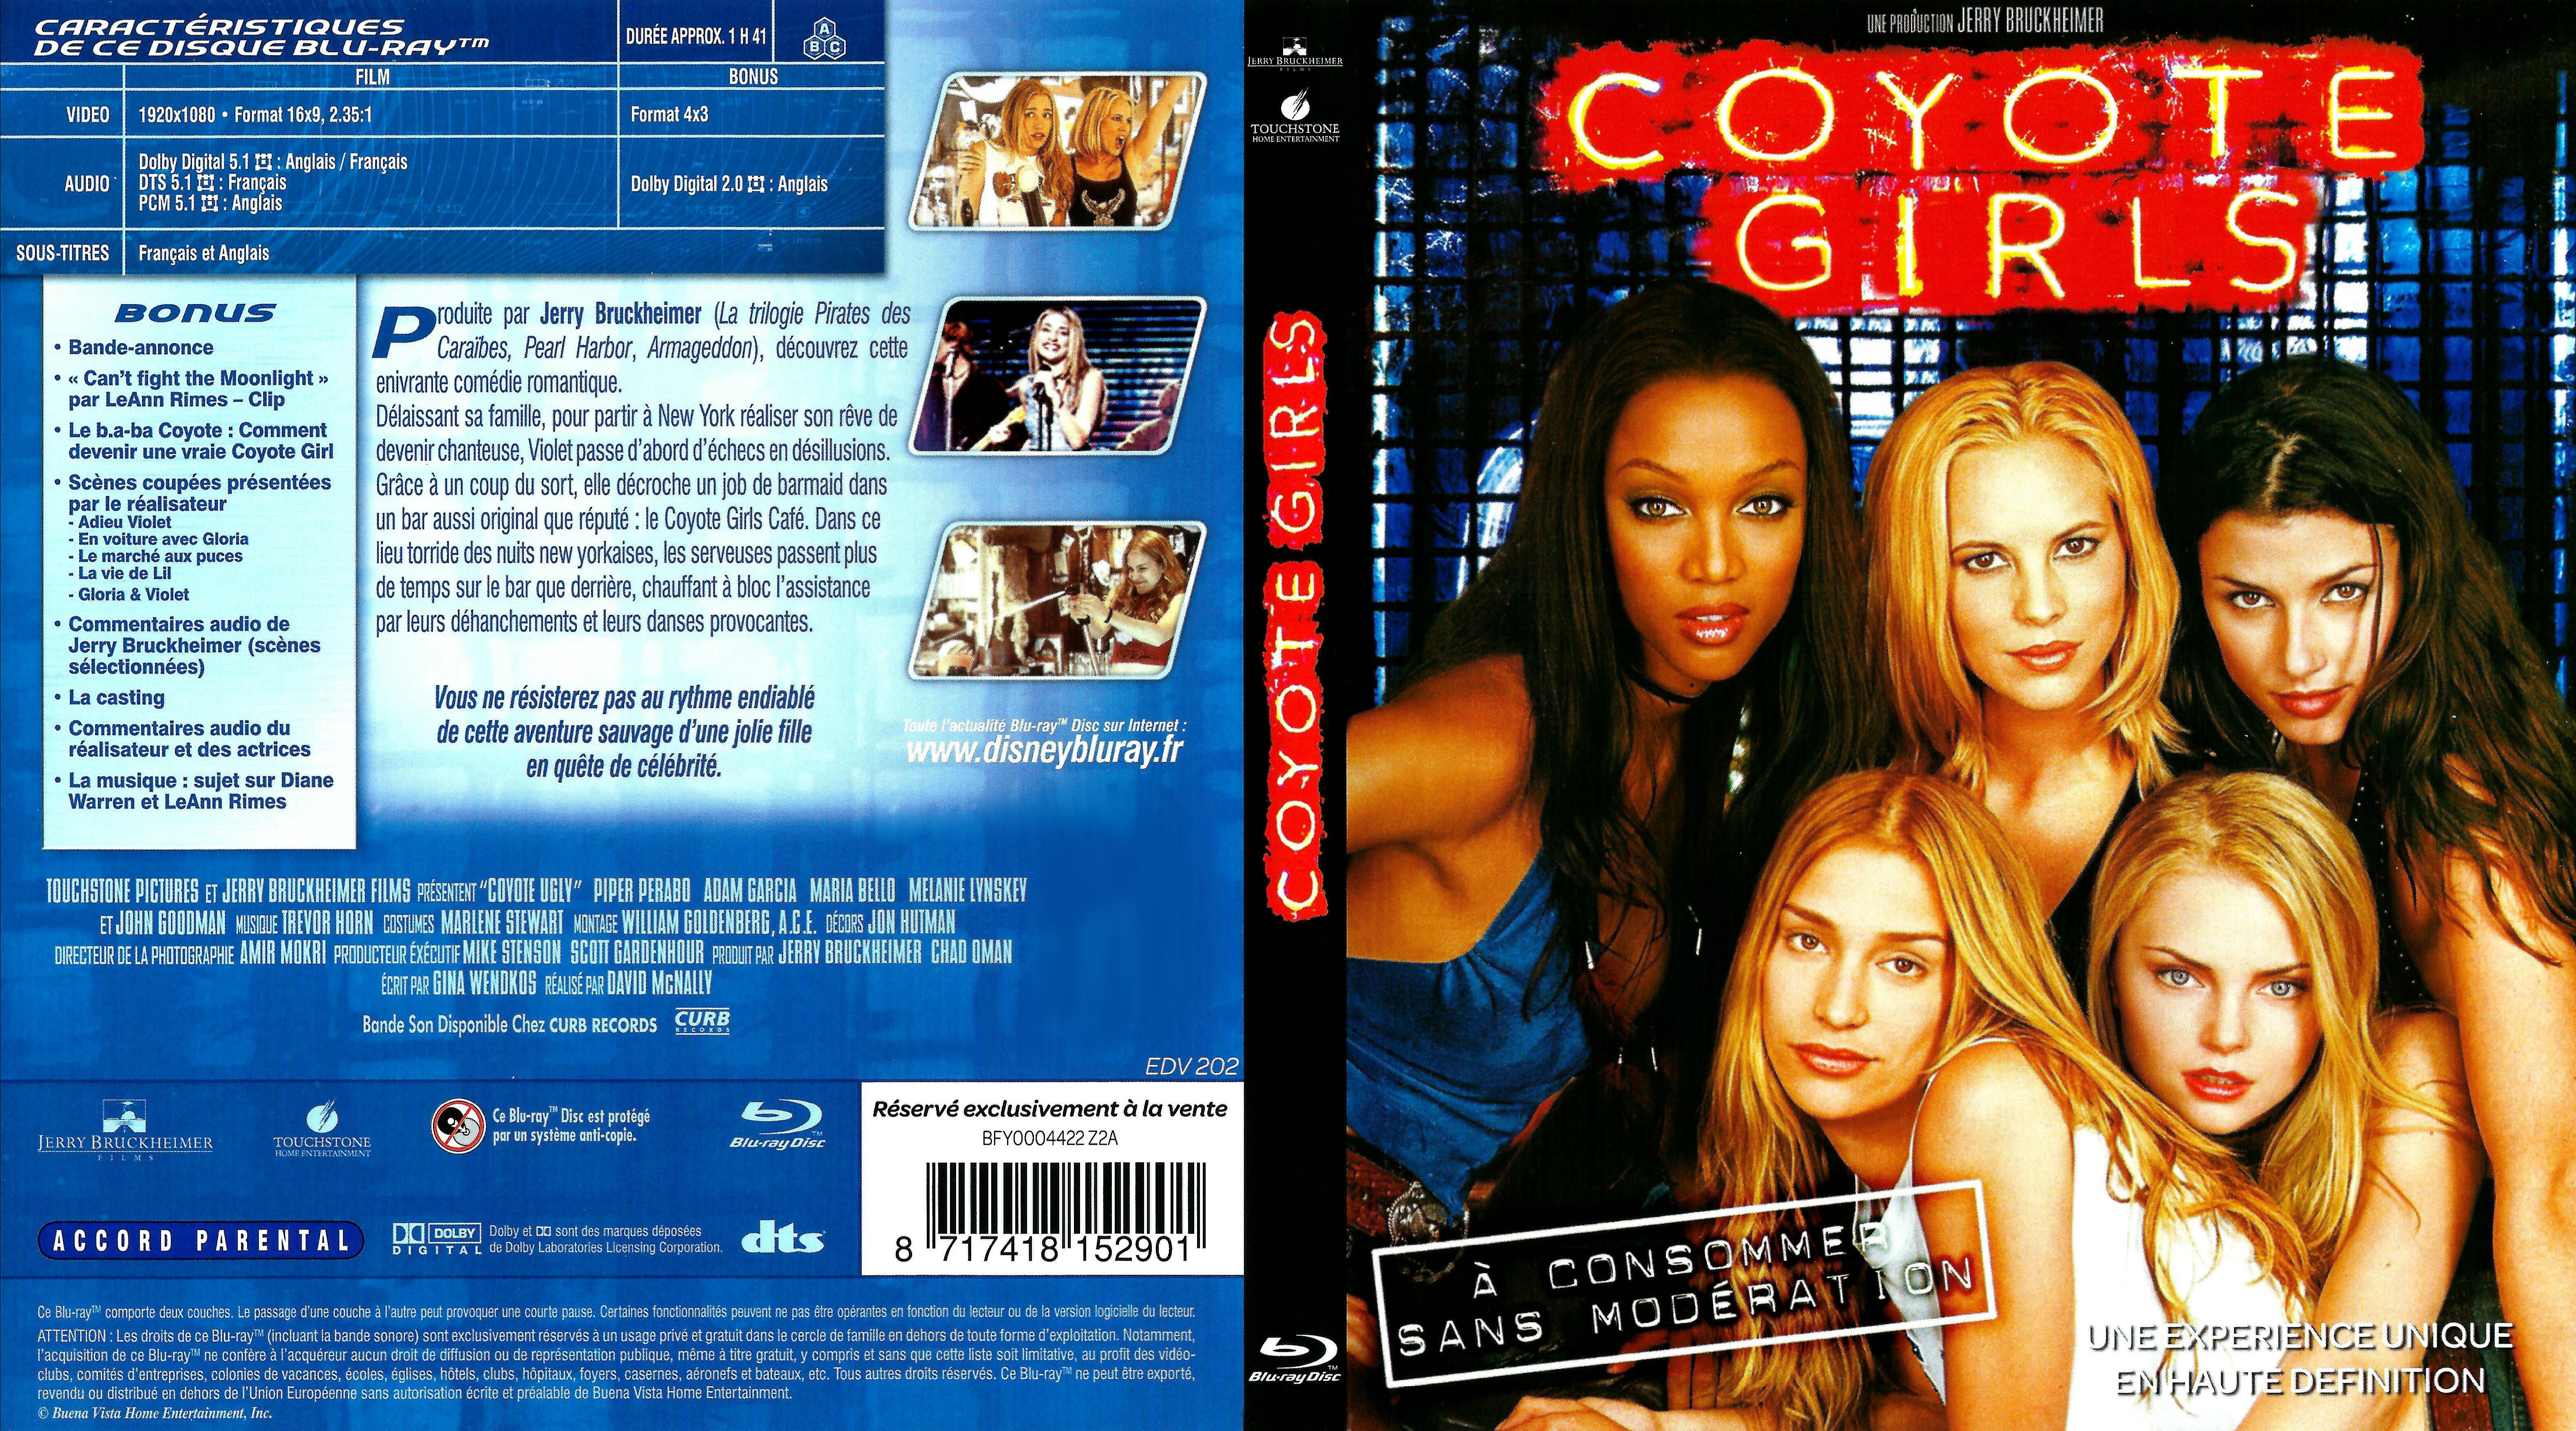 Jaquette DVD Coyote girls (BLU-RAY)